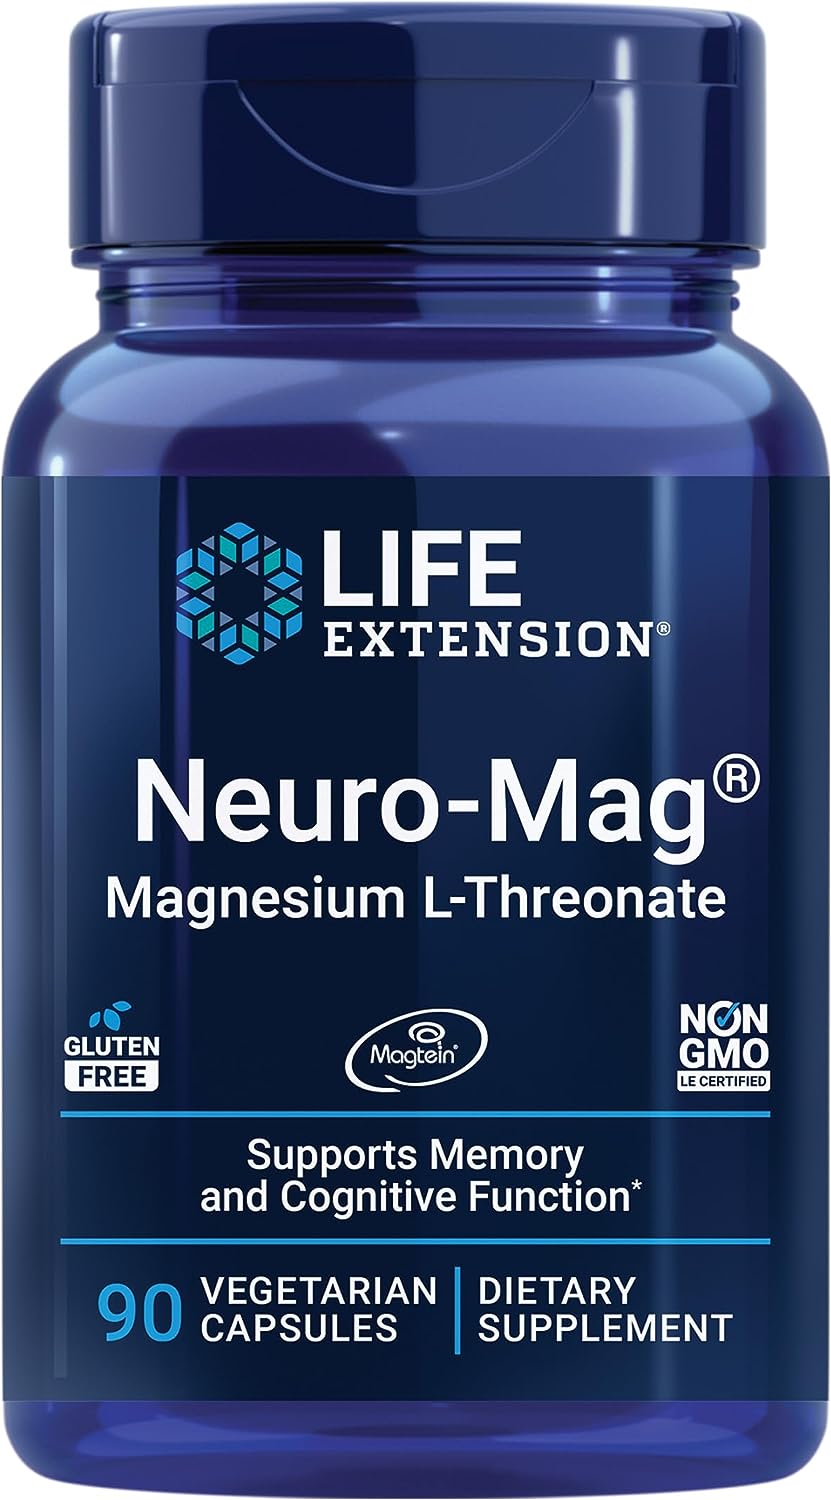 Life Extension Neuro-mag Magnesium L-threonate Dietary Supplements, 90 Capsules, Pack of 1